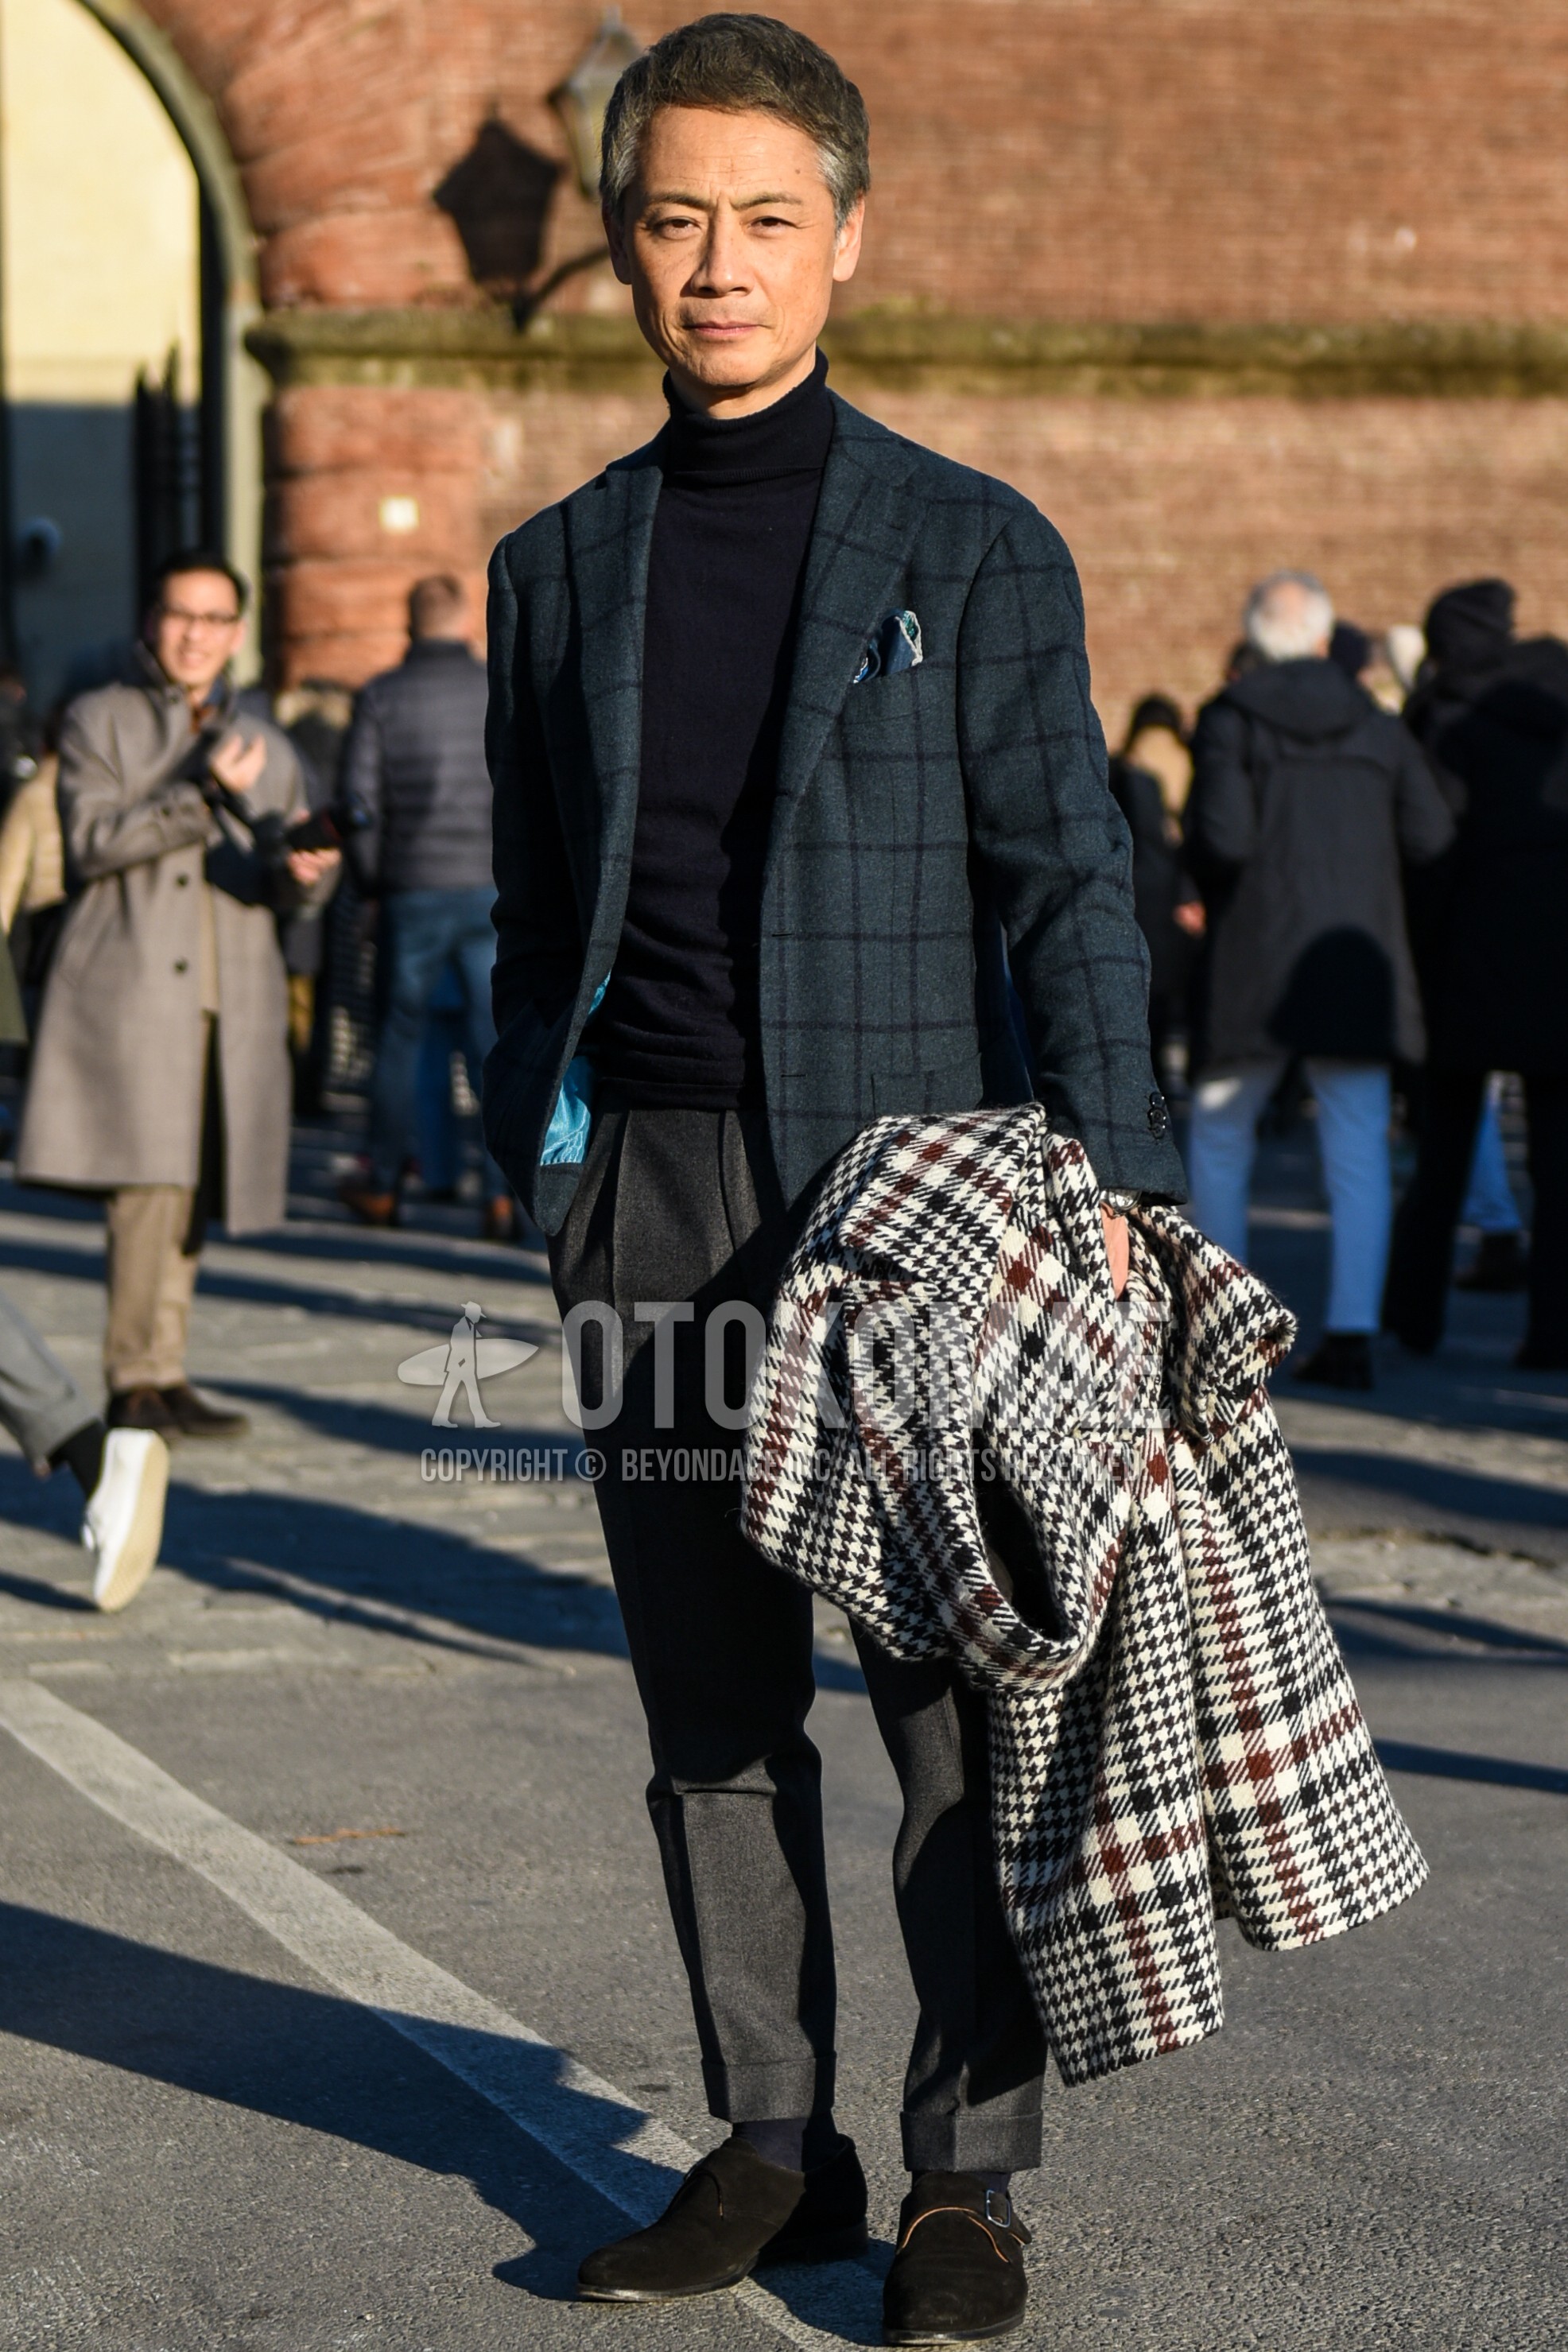 Men's spring autumn outfit with gray check tailored jacket, black plain turtleneck knit, gray plain slacks, gray plain pleated pants, gray plain ankle pants, gray plain socks, brown monk shoes leather shoes.